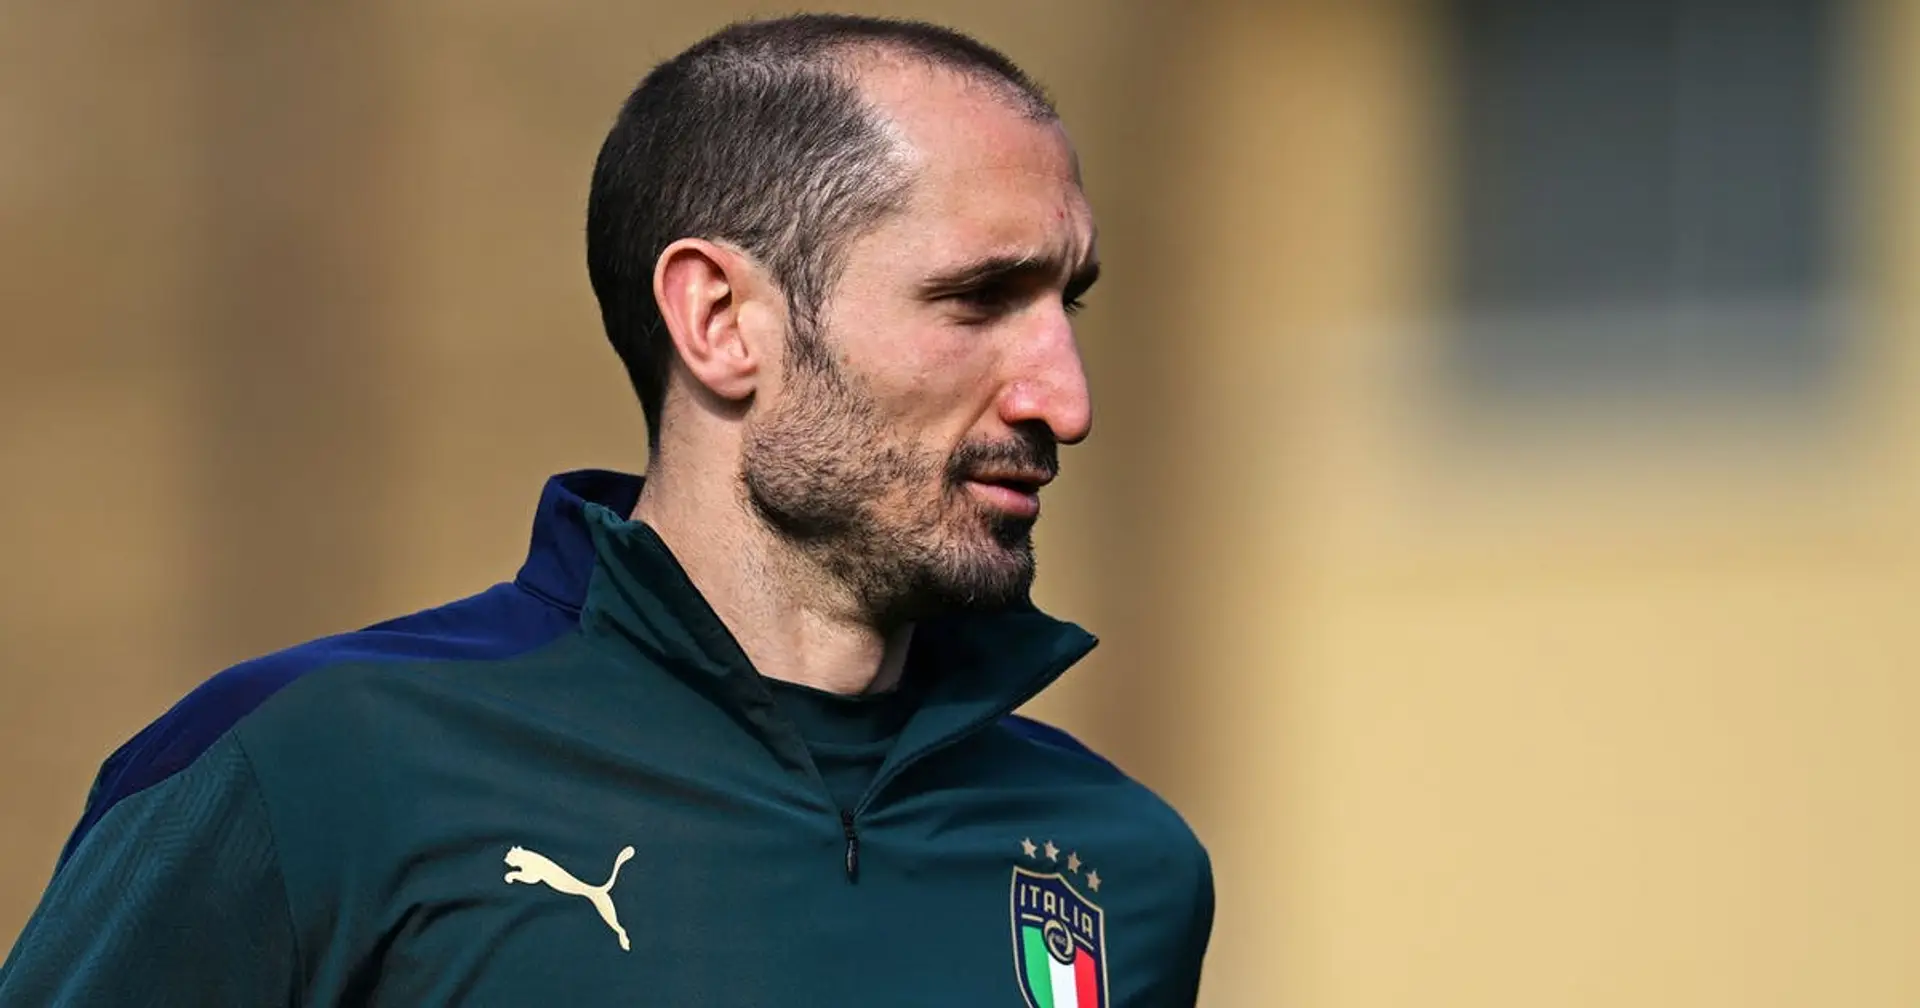 End of an era: Giorgio Chiellini has 3 options for future after Italy's World Cup disaster